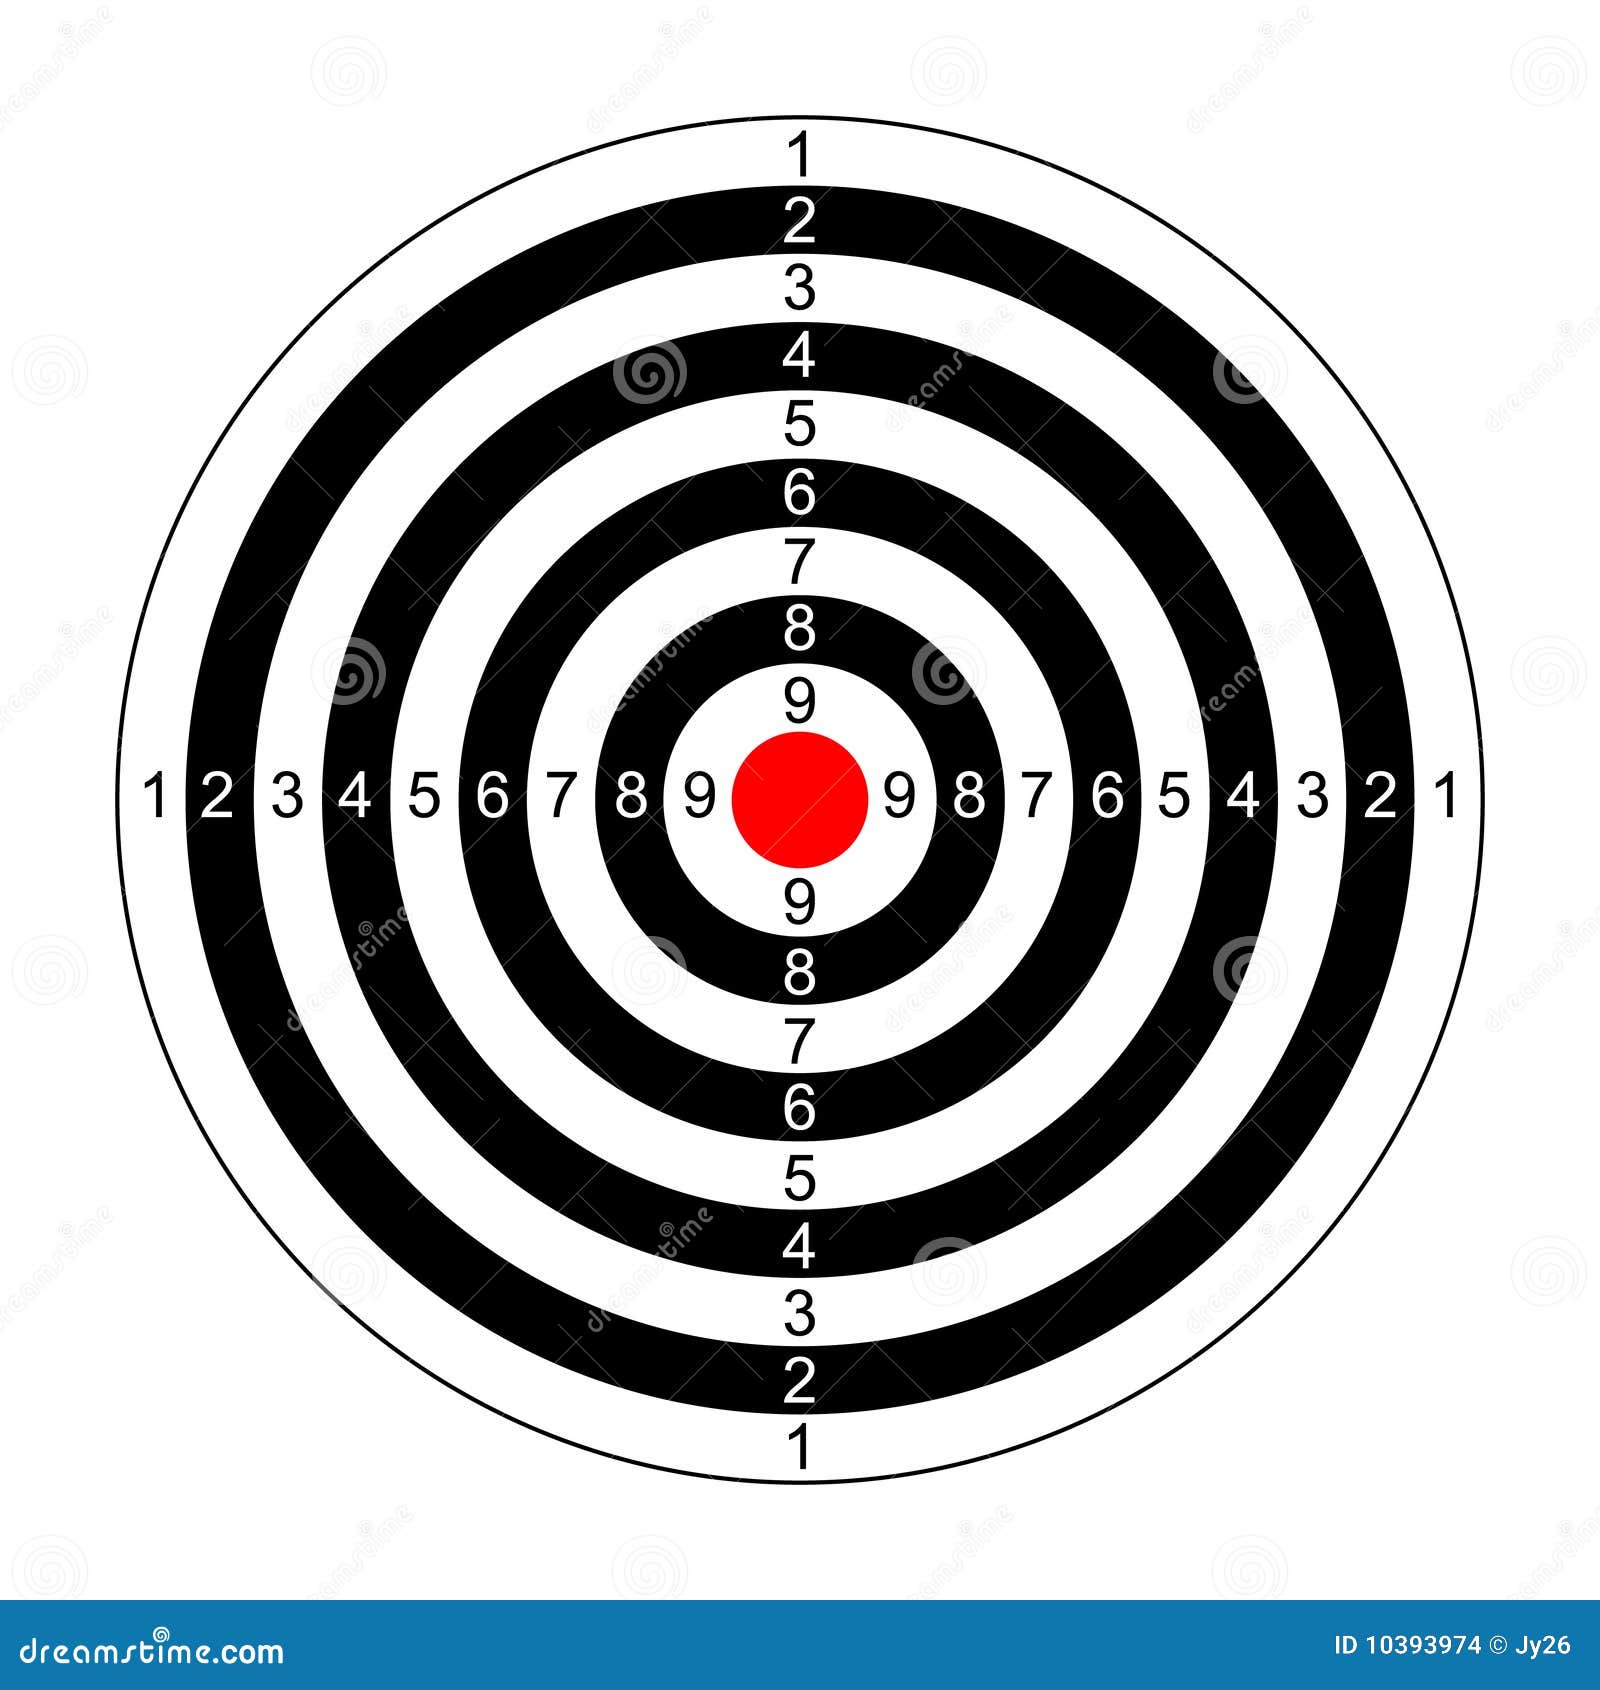 Rifle target vector stock vector. Illustration of hunting - 10393974